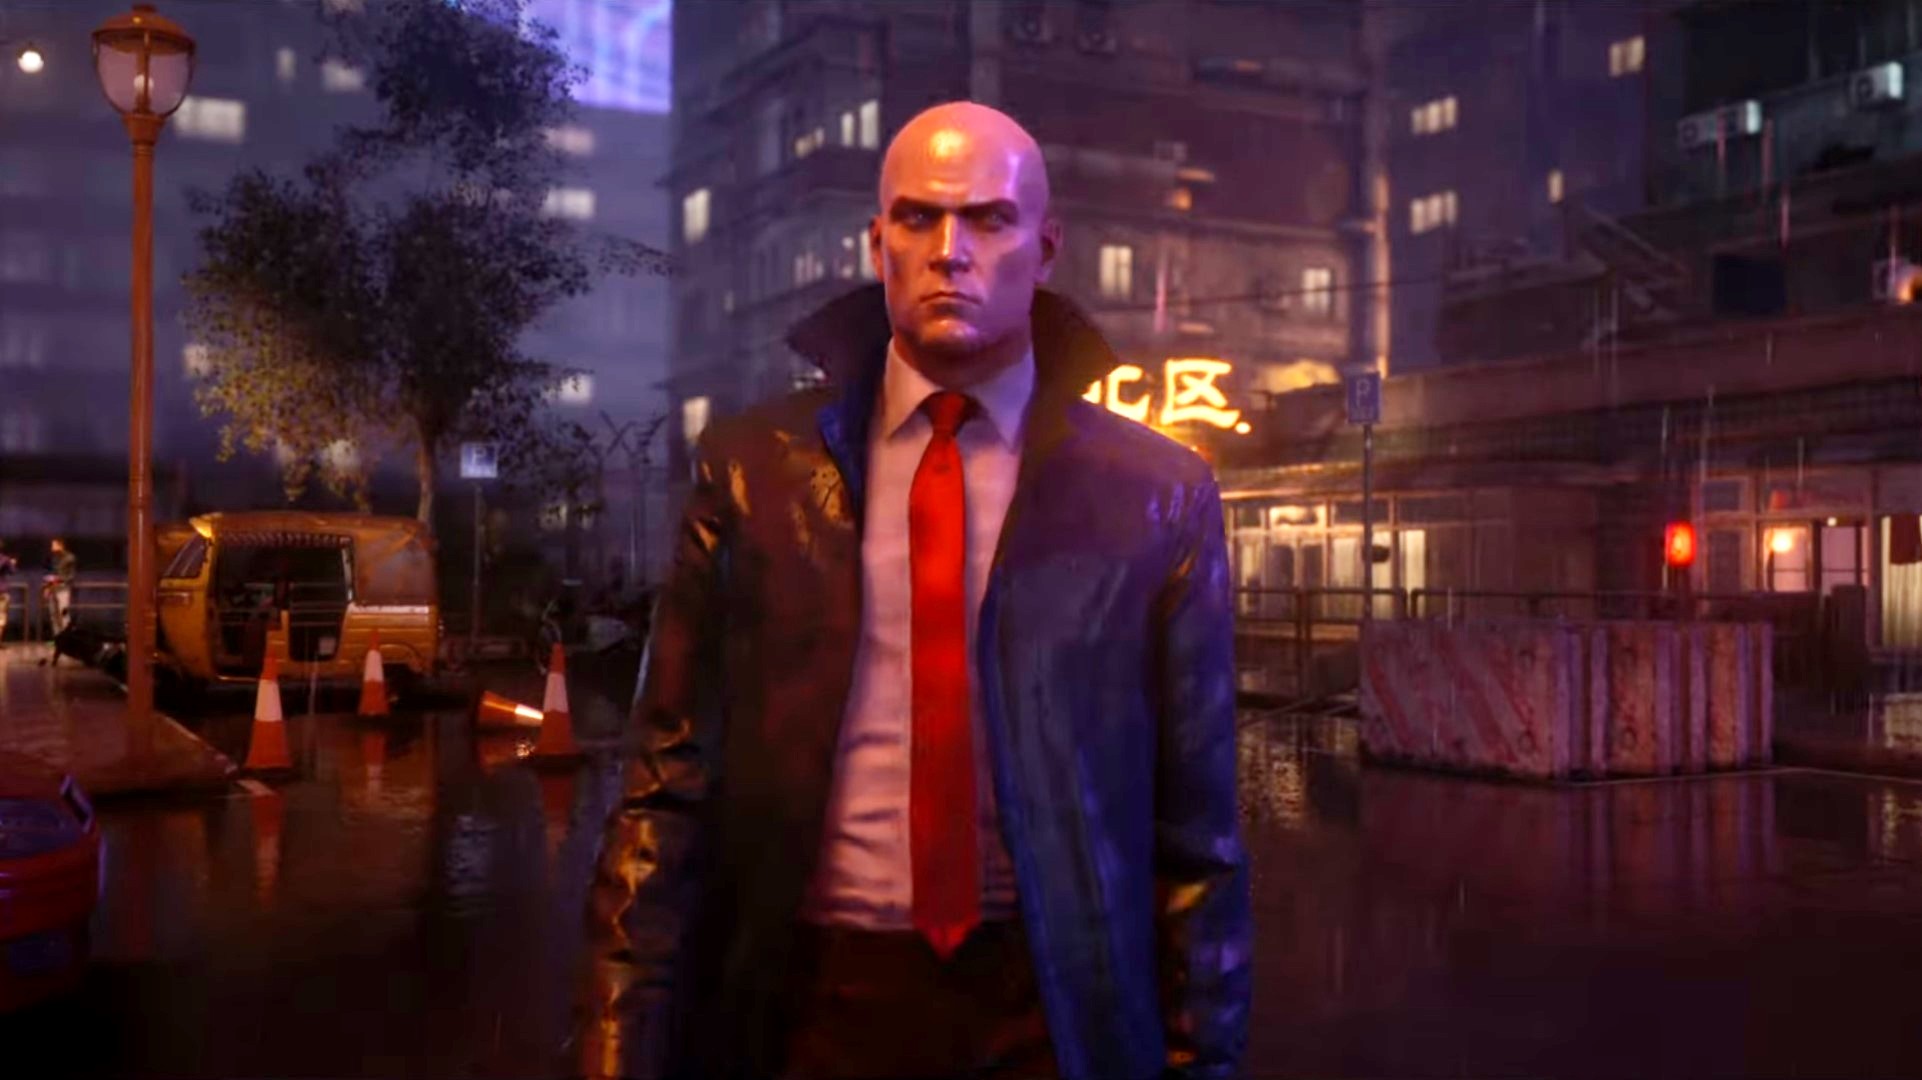 Hitman Freelancer update release date, time and free World of